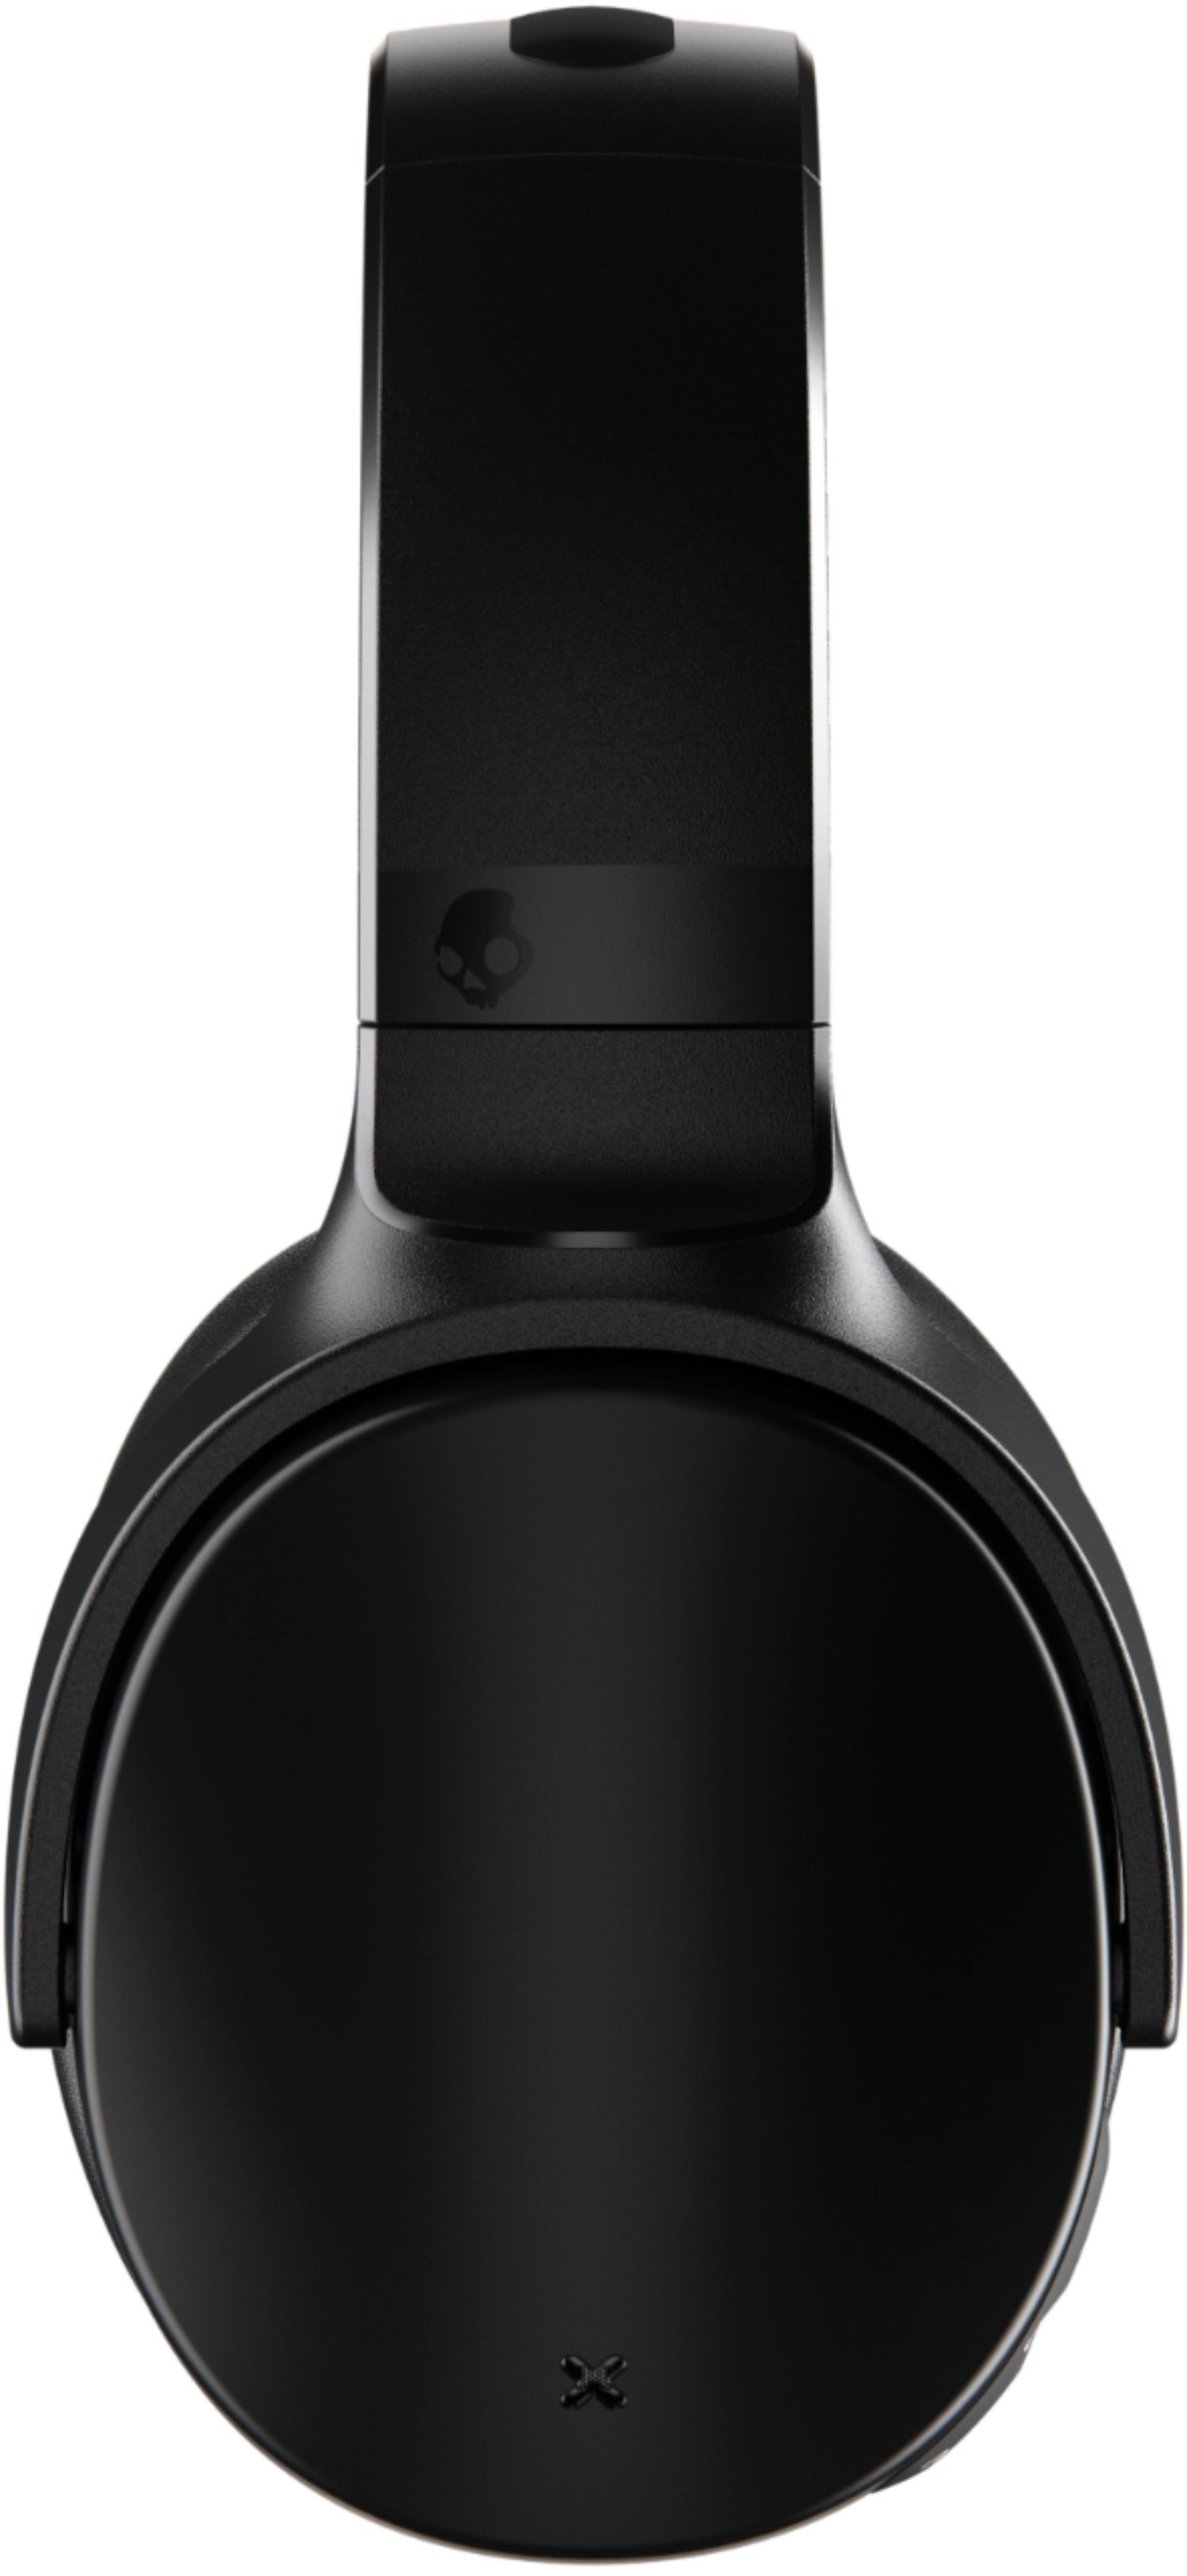 Skullcandy Crusher ANC Wireless Noise Cancelling Over-the-Ear Headphones  Black S6CPW-M448 - Best Buy